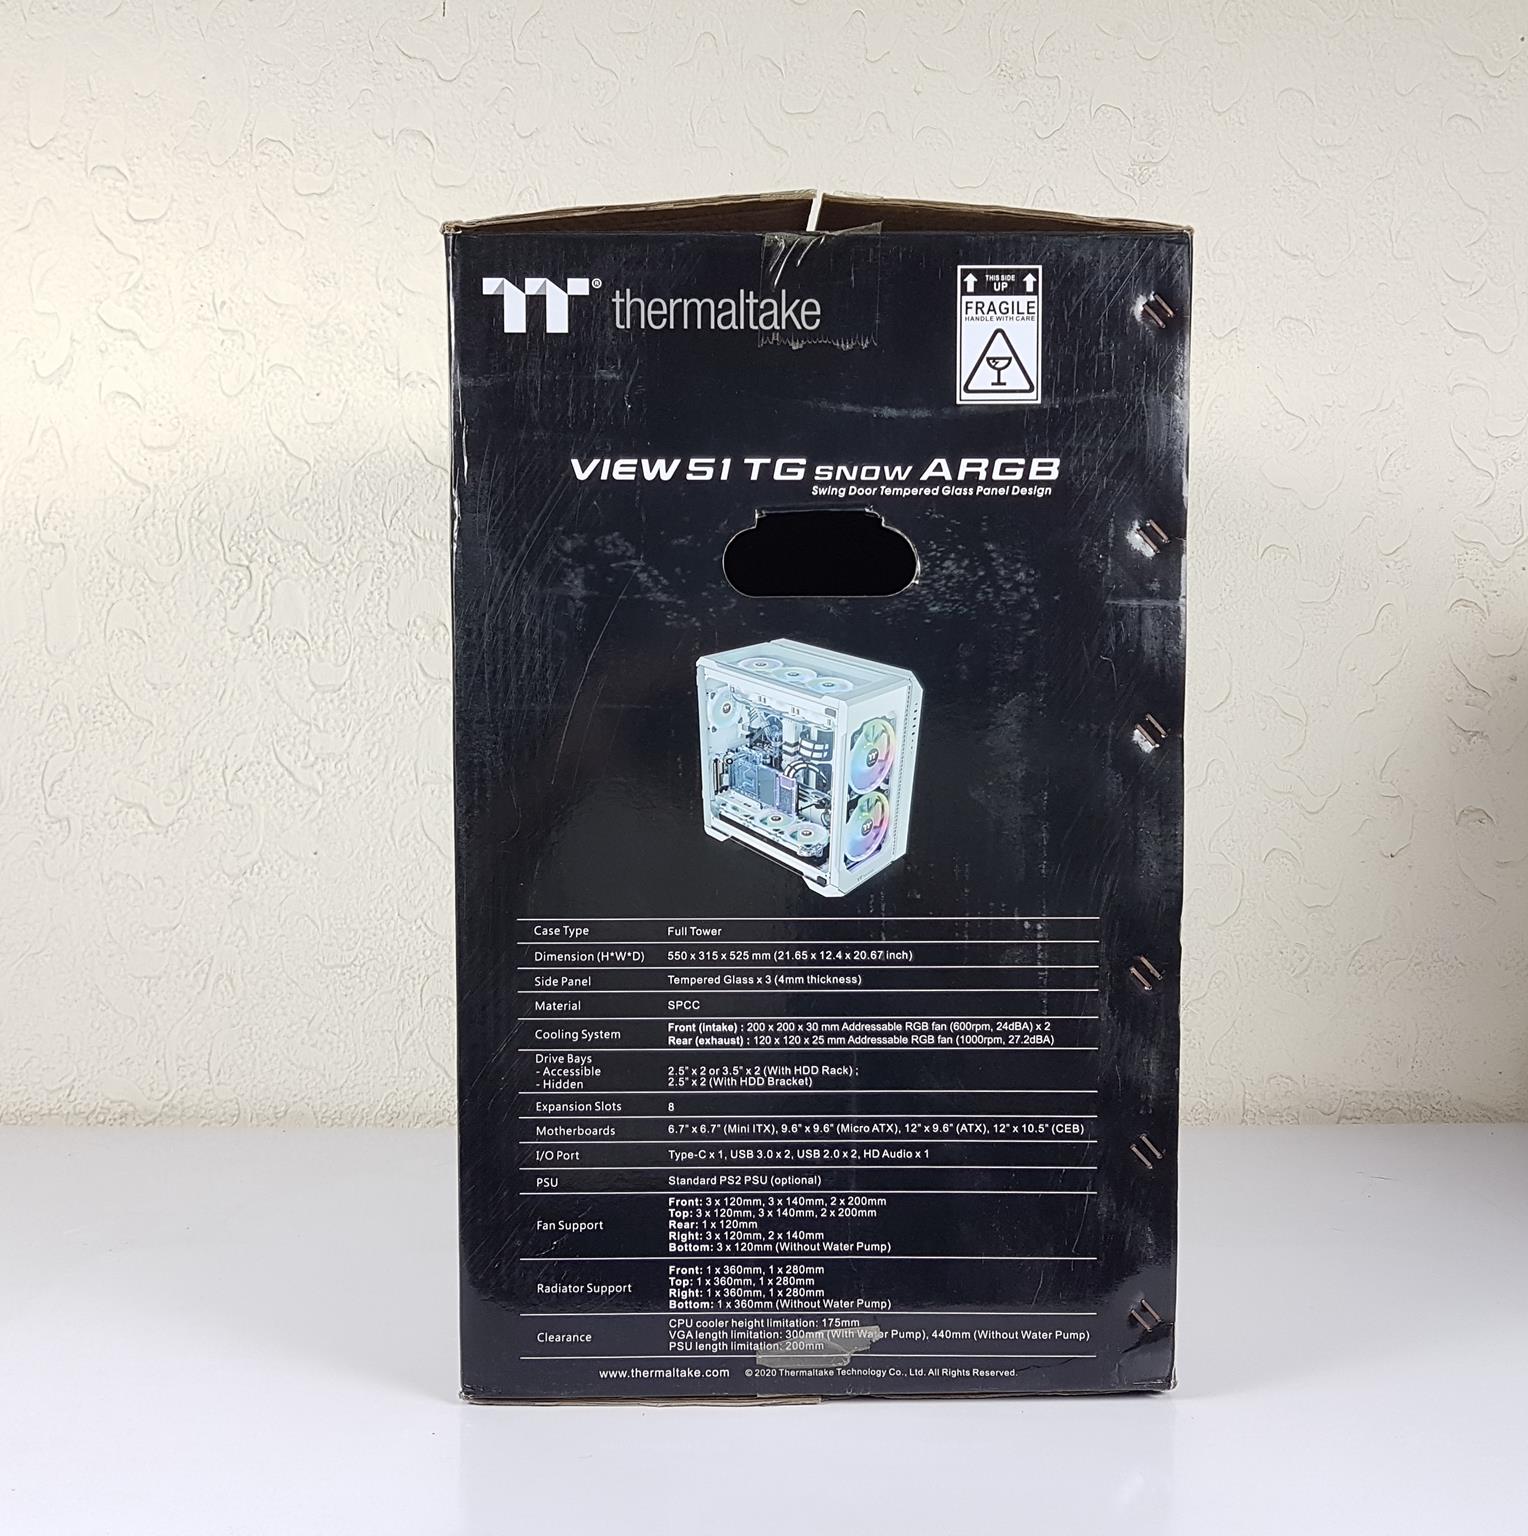 thermaltake view 51 Unboxing